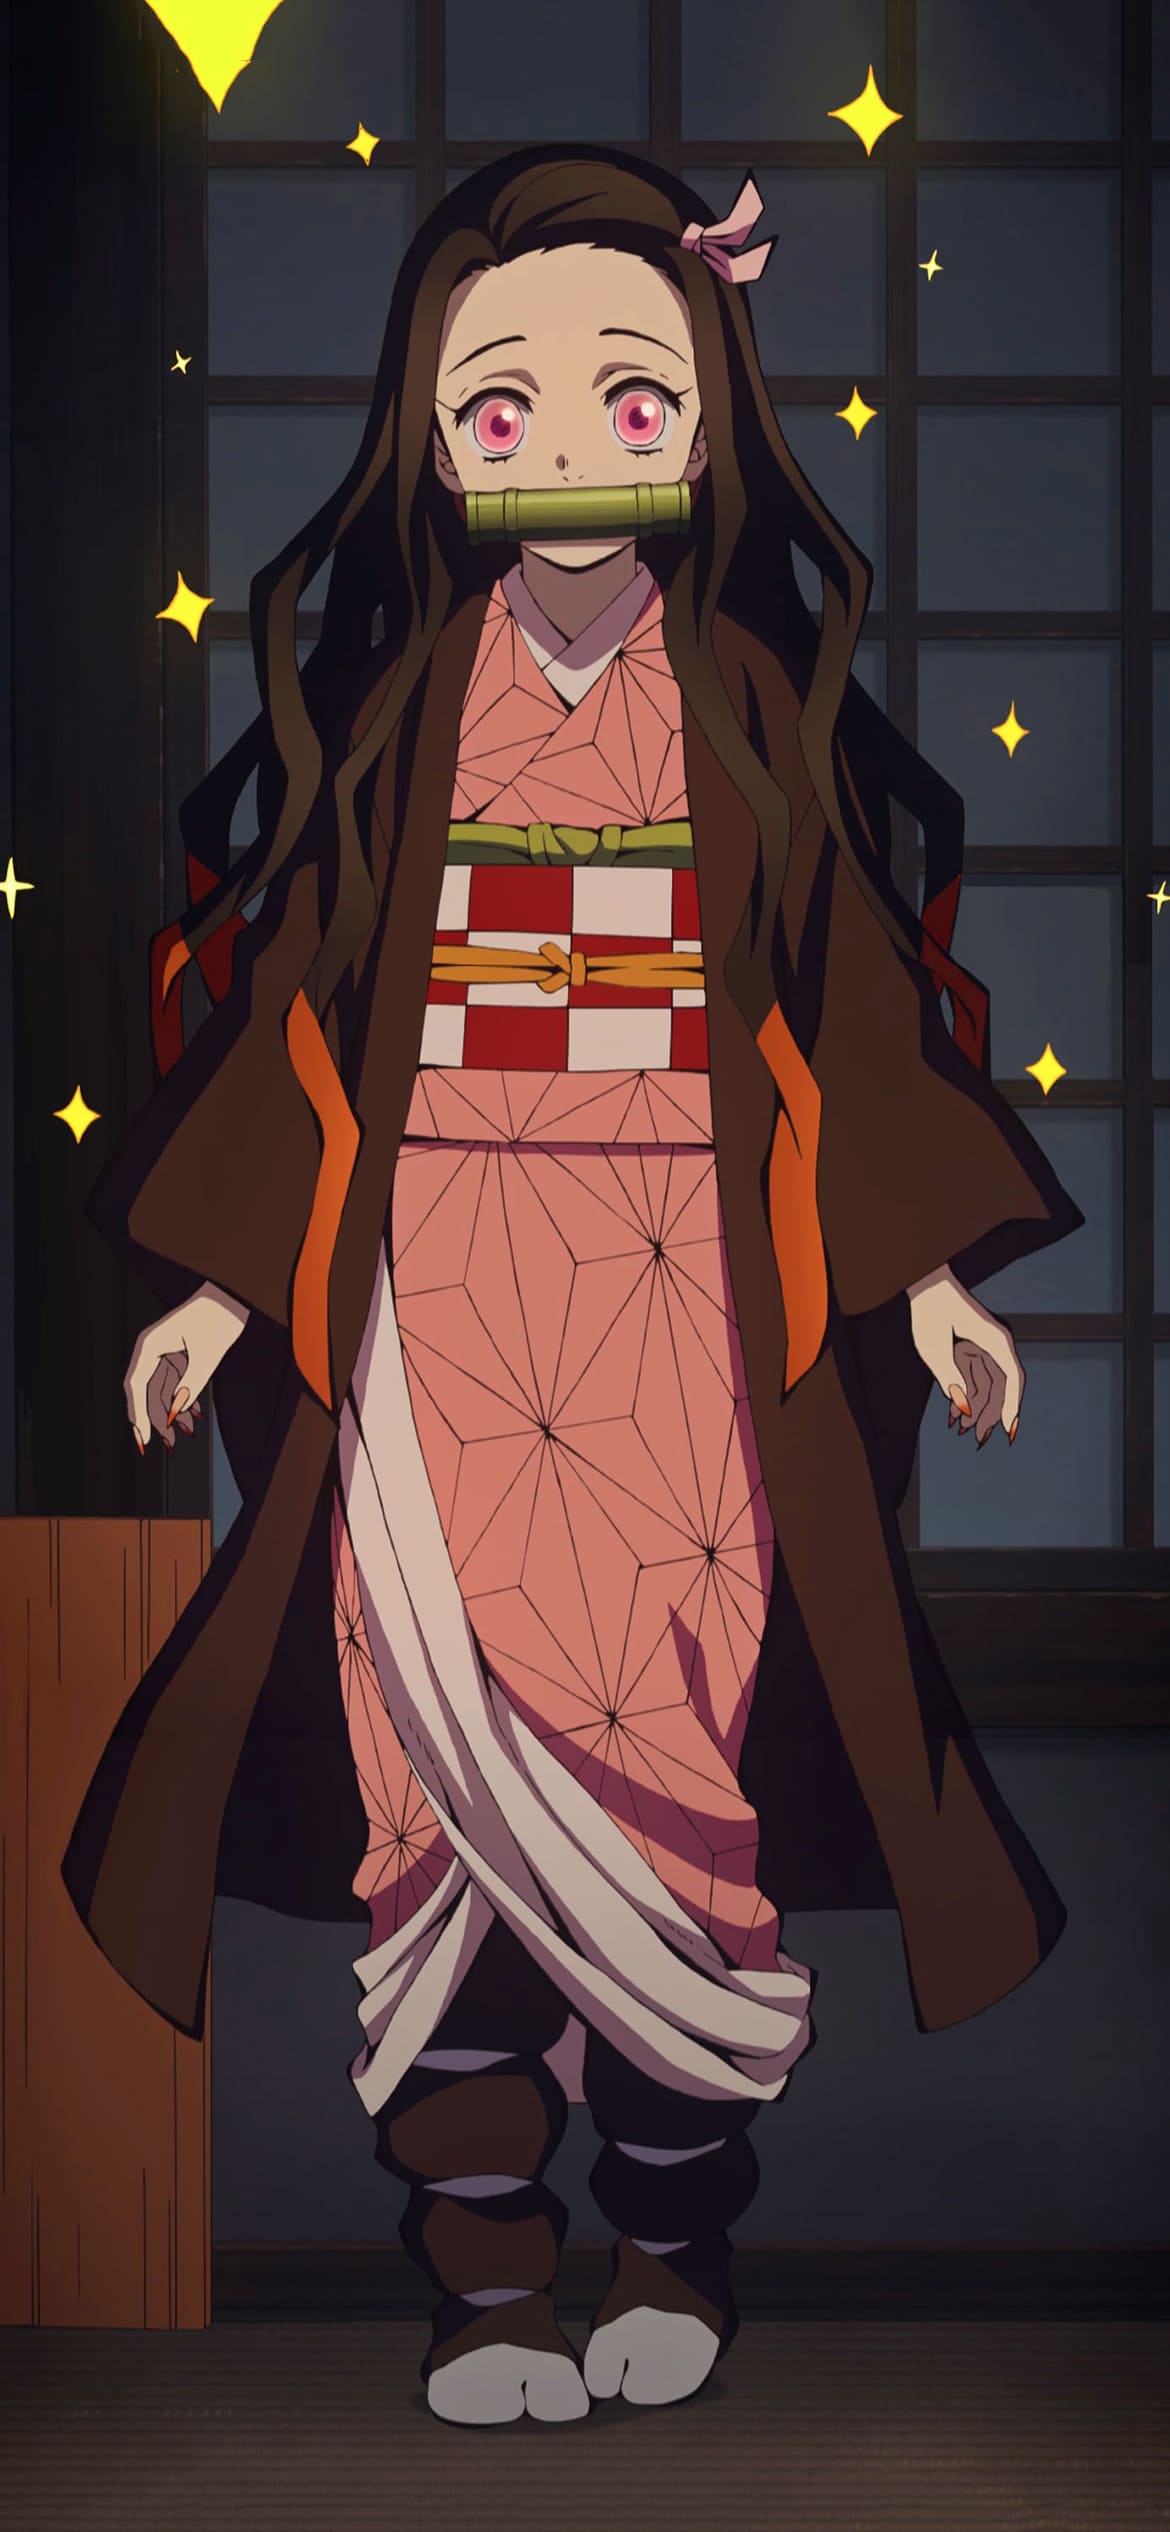 A cartoon character with long hair and an outfit - Nezuko